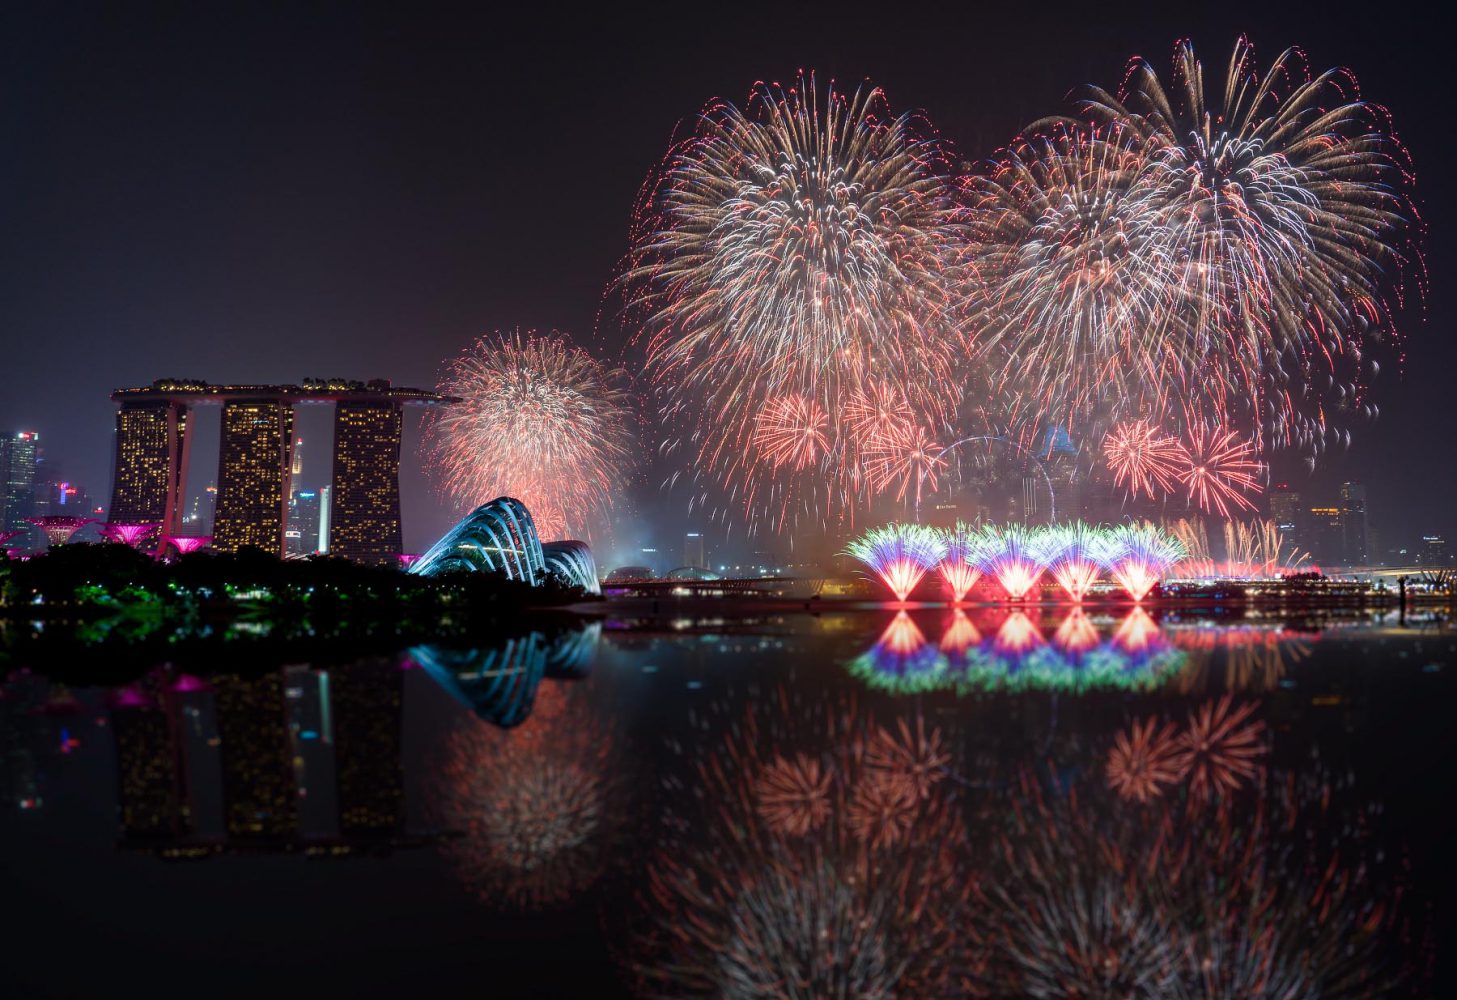 Spectacular fireworks display in Singapore, view from the Gardens by the Bay looking across the city skyline